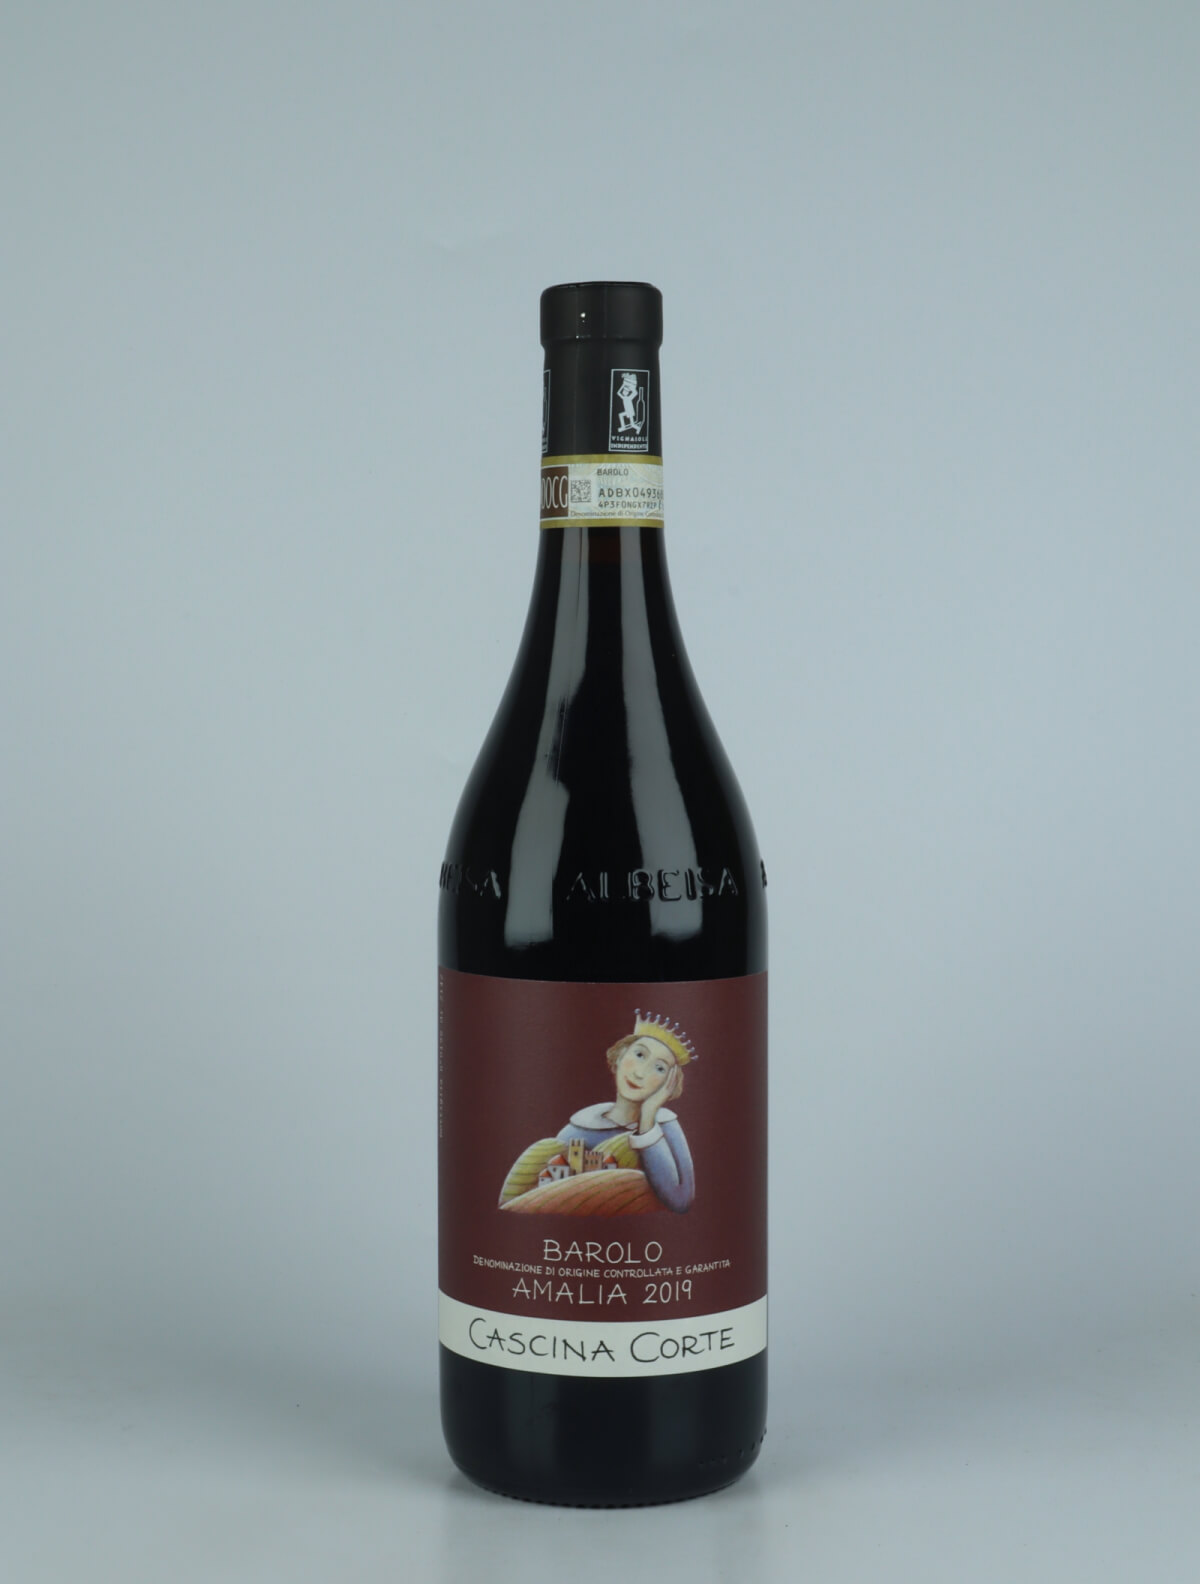 A bottle 2019 Barolo - Amalia Red wine from Cascina Corte, Piedmont in Italy